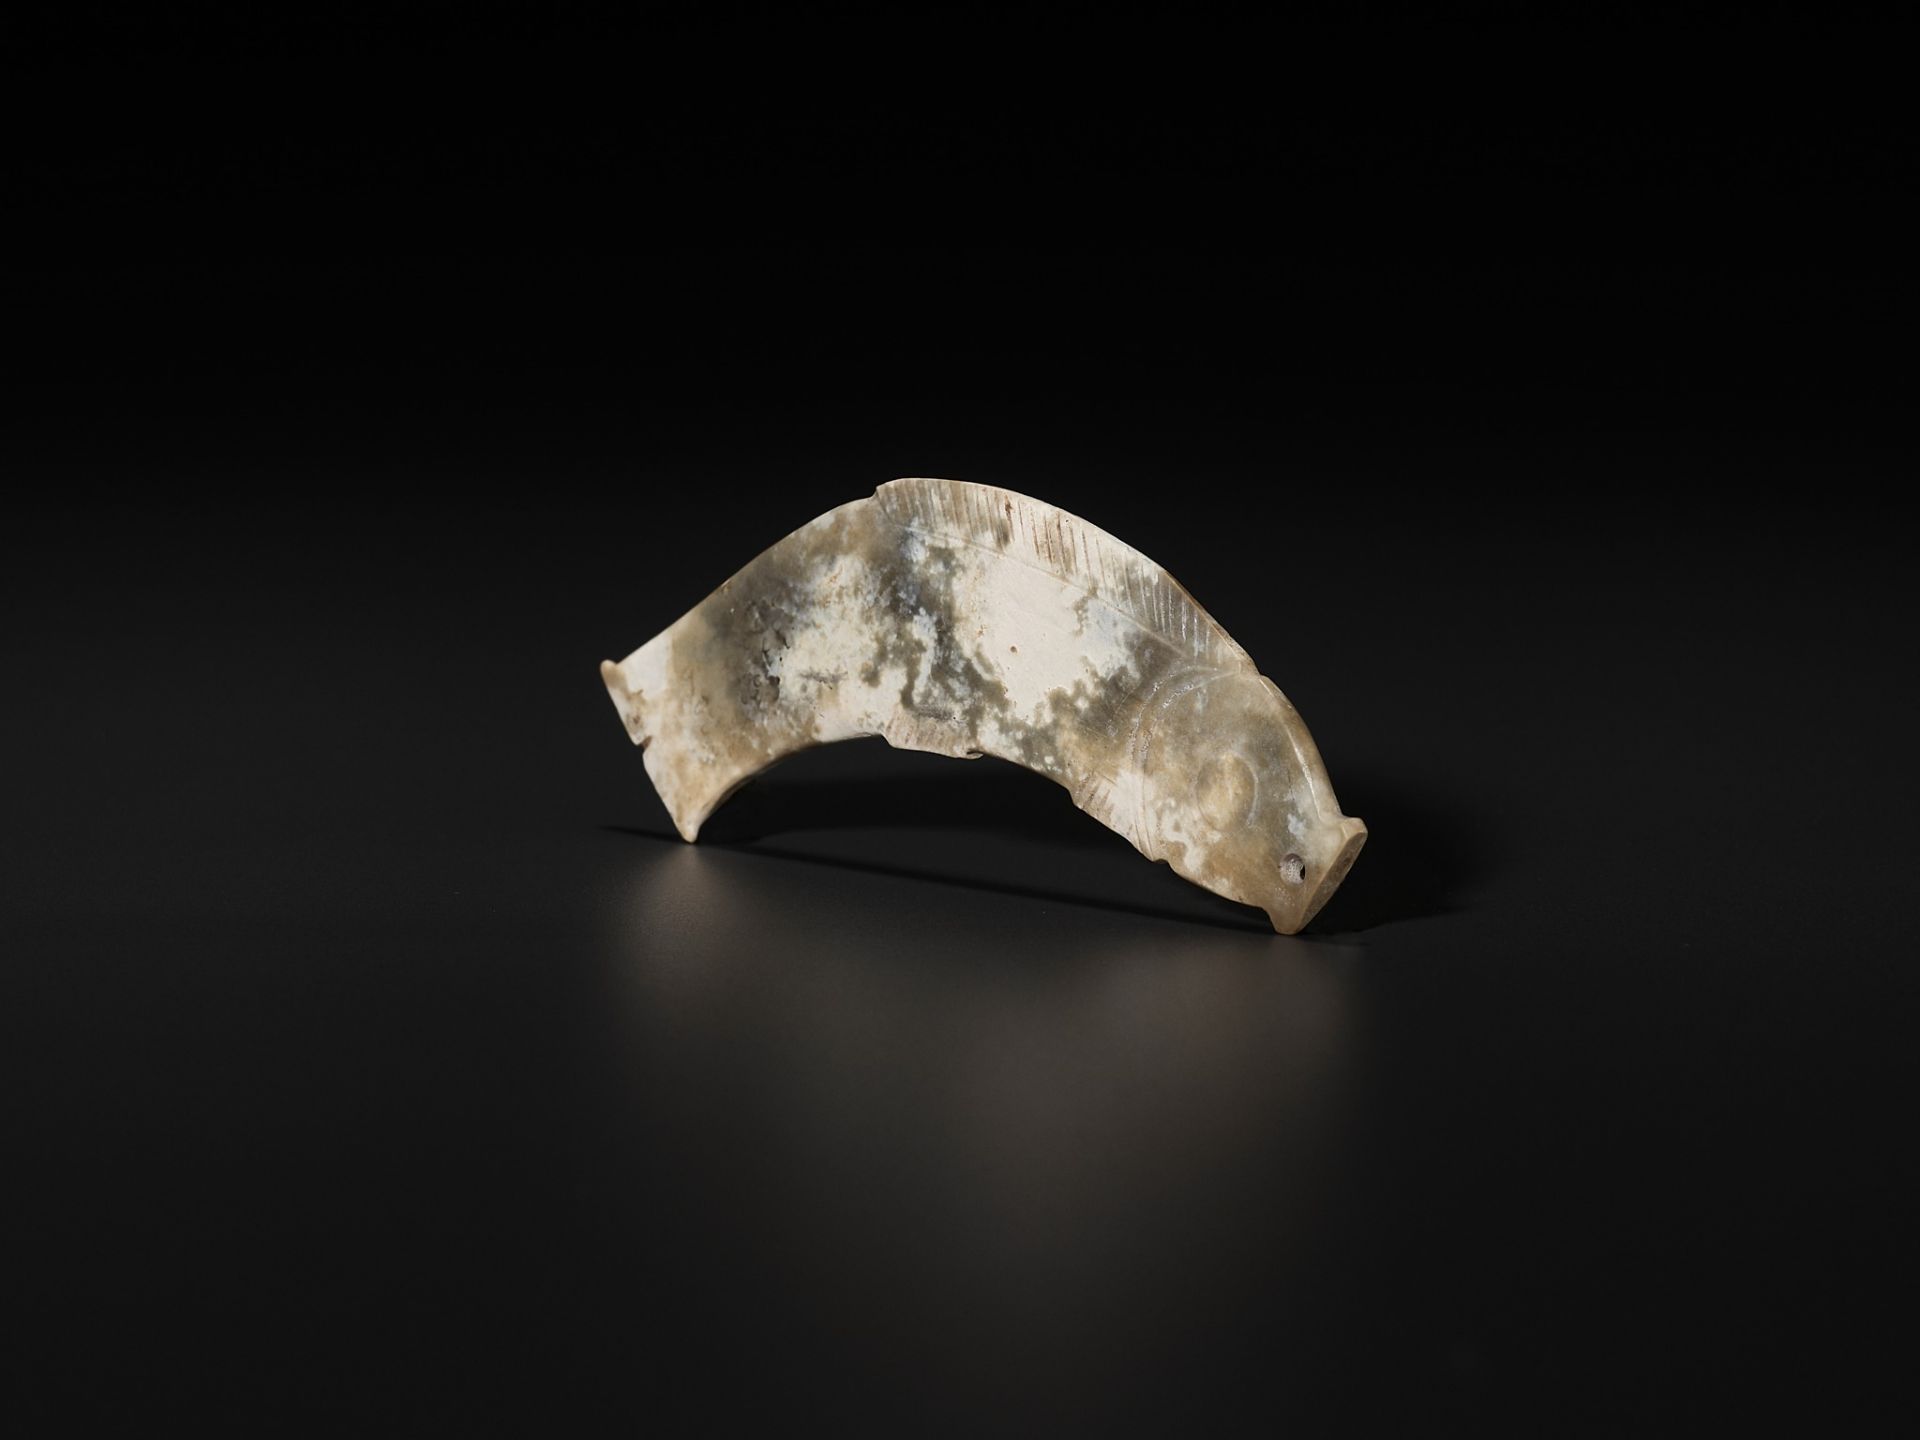 A DEEP CELADON JADE 'FISH' PENDANT, LATE SHANG TO WESTERN ZHOU DYNASTY - Image 6 of 10